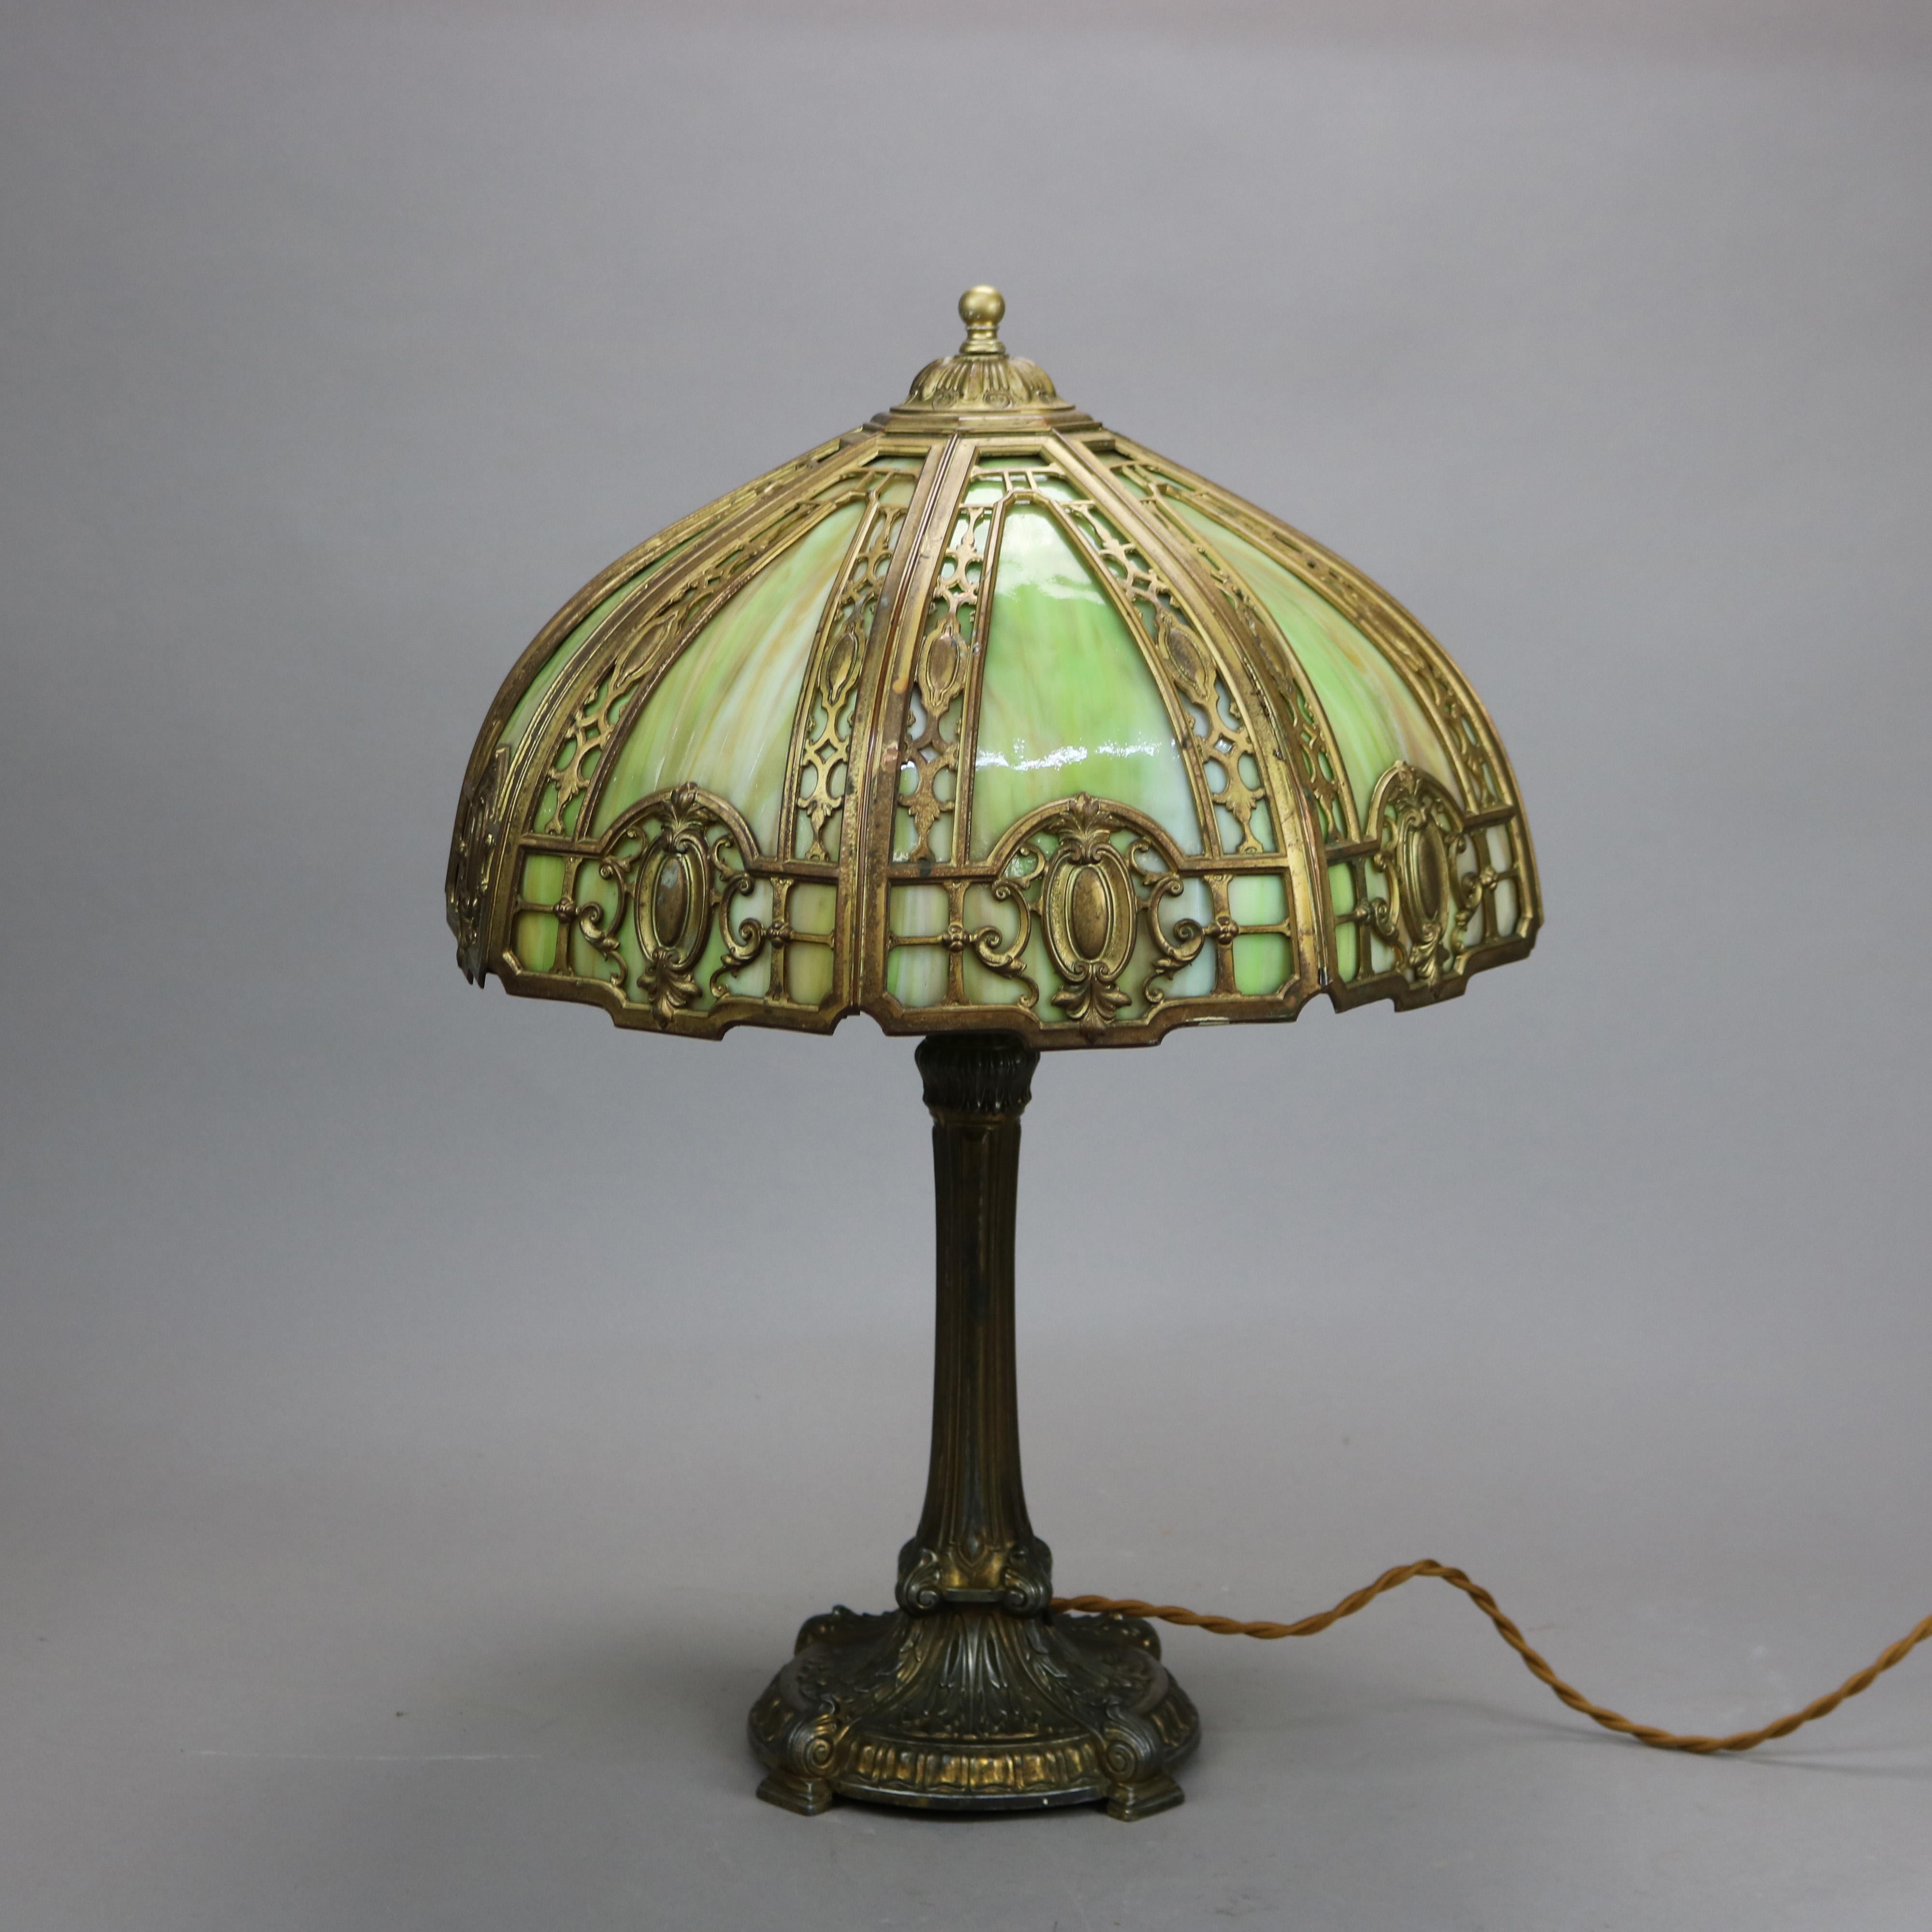 An antique Arts and Crafts table lamp in the manner of Bradley and Hubbard offers cast dome filigree shade with shield form elements and housing bent slag glass panels over double socket cast bas, c1920

Measures - 22''H x 15.25''W x 15.25''D.